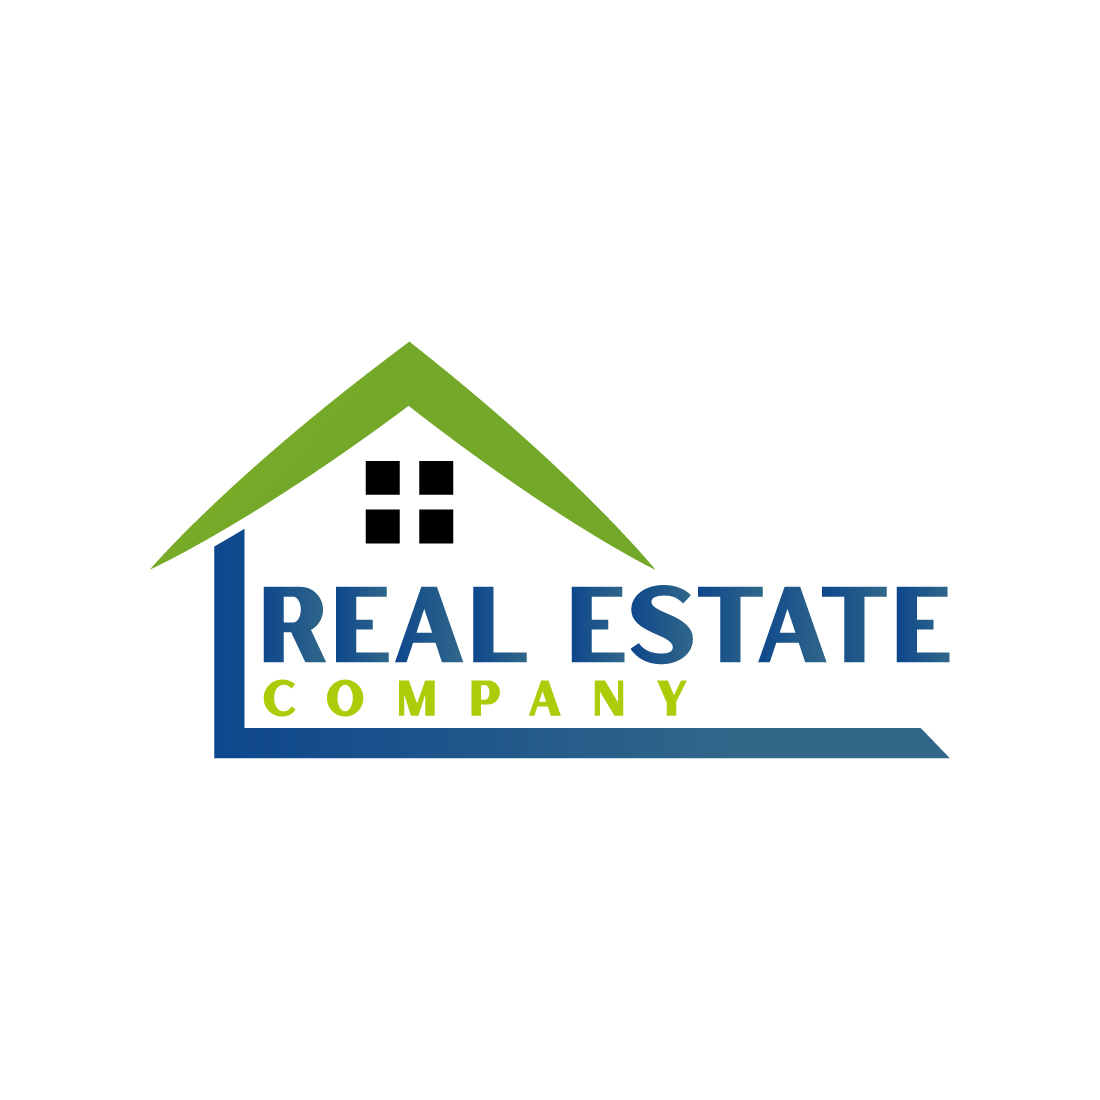 Real estate logo with green, dark blue color cover image.